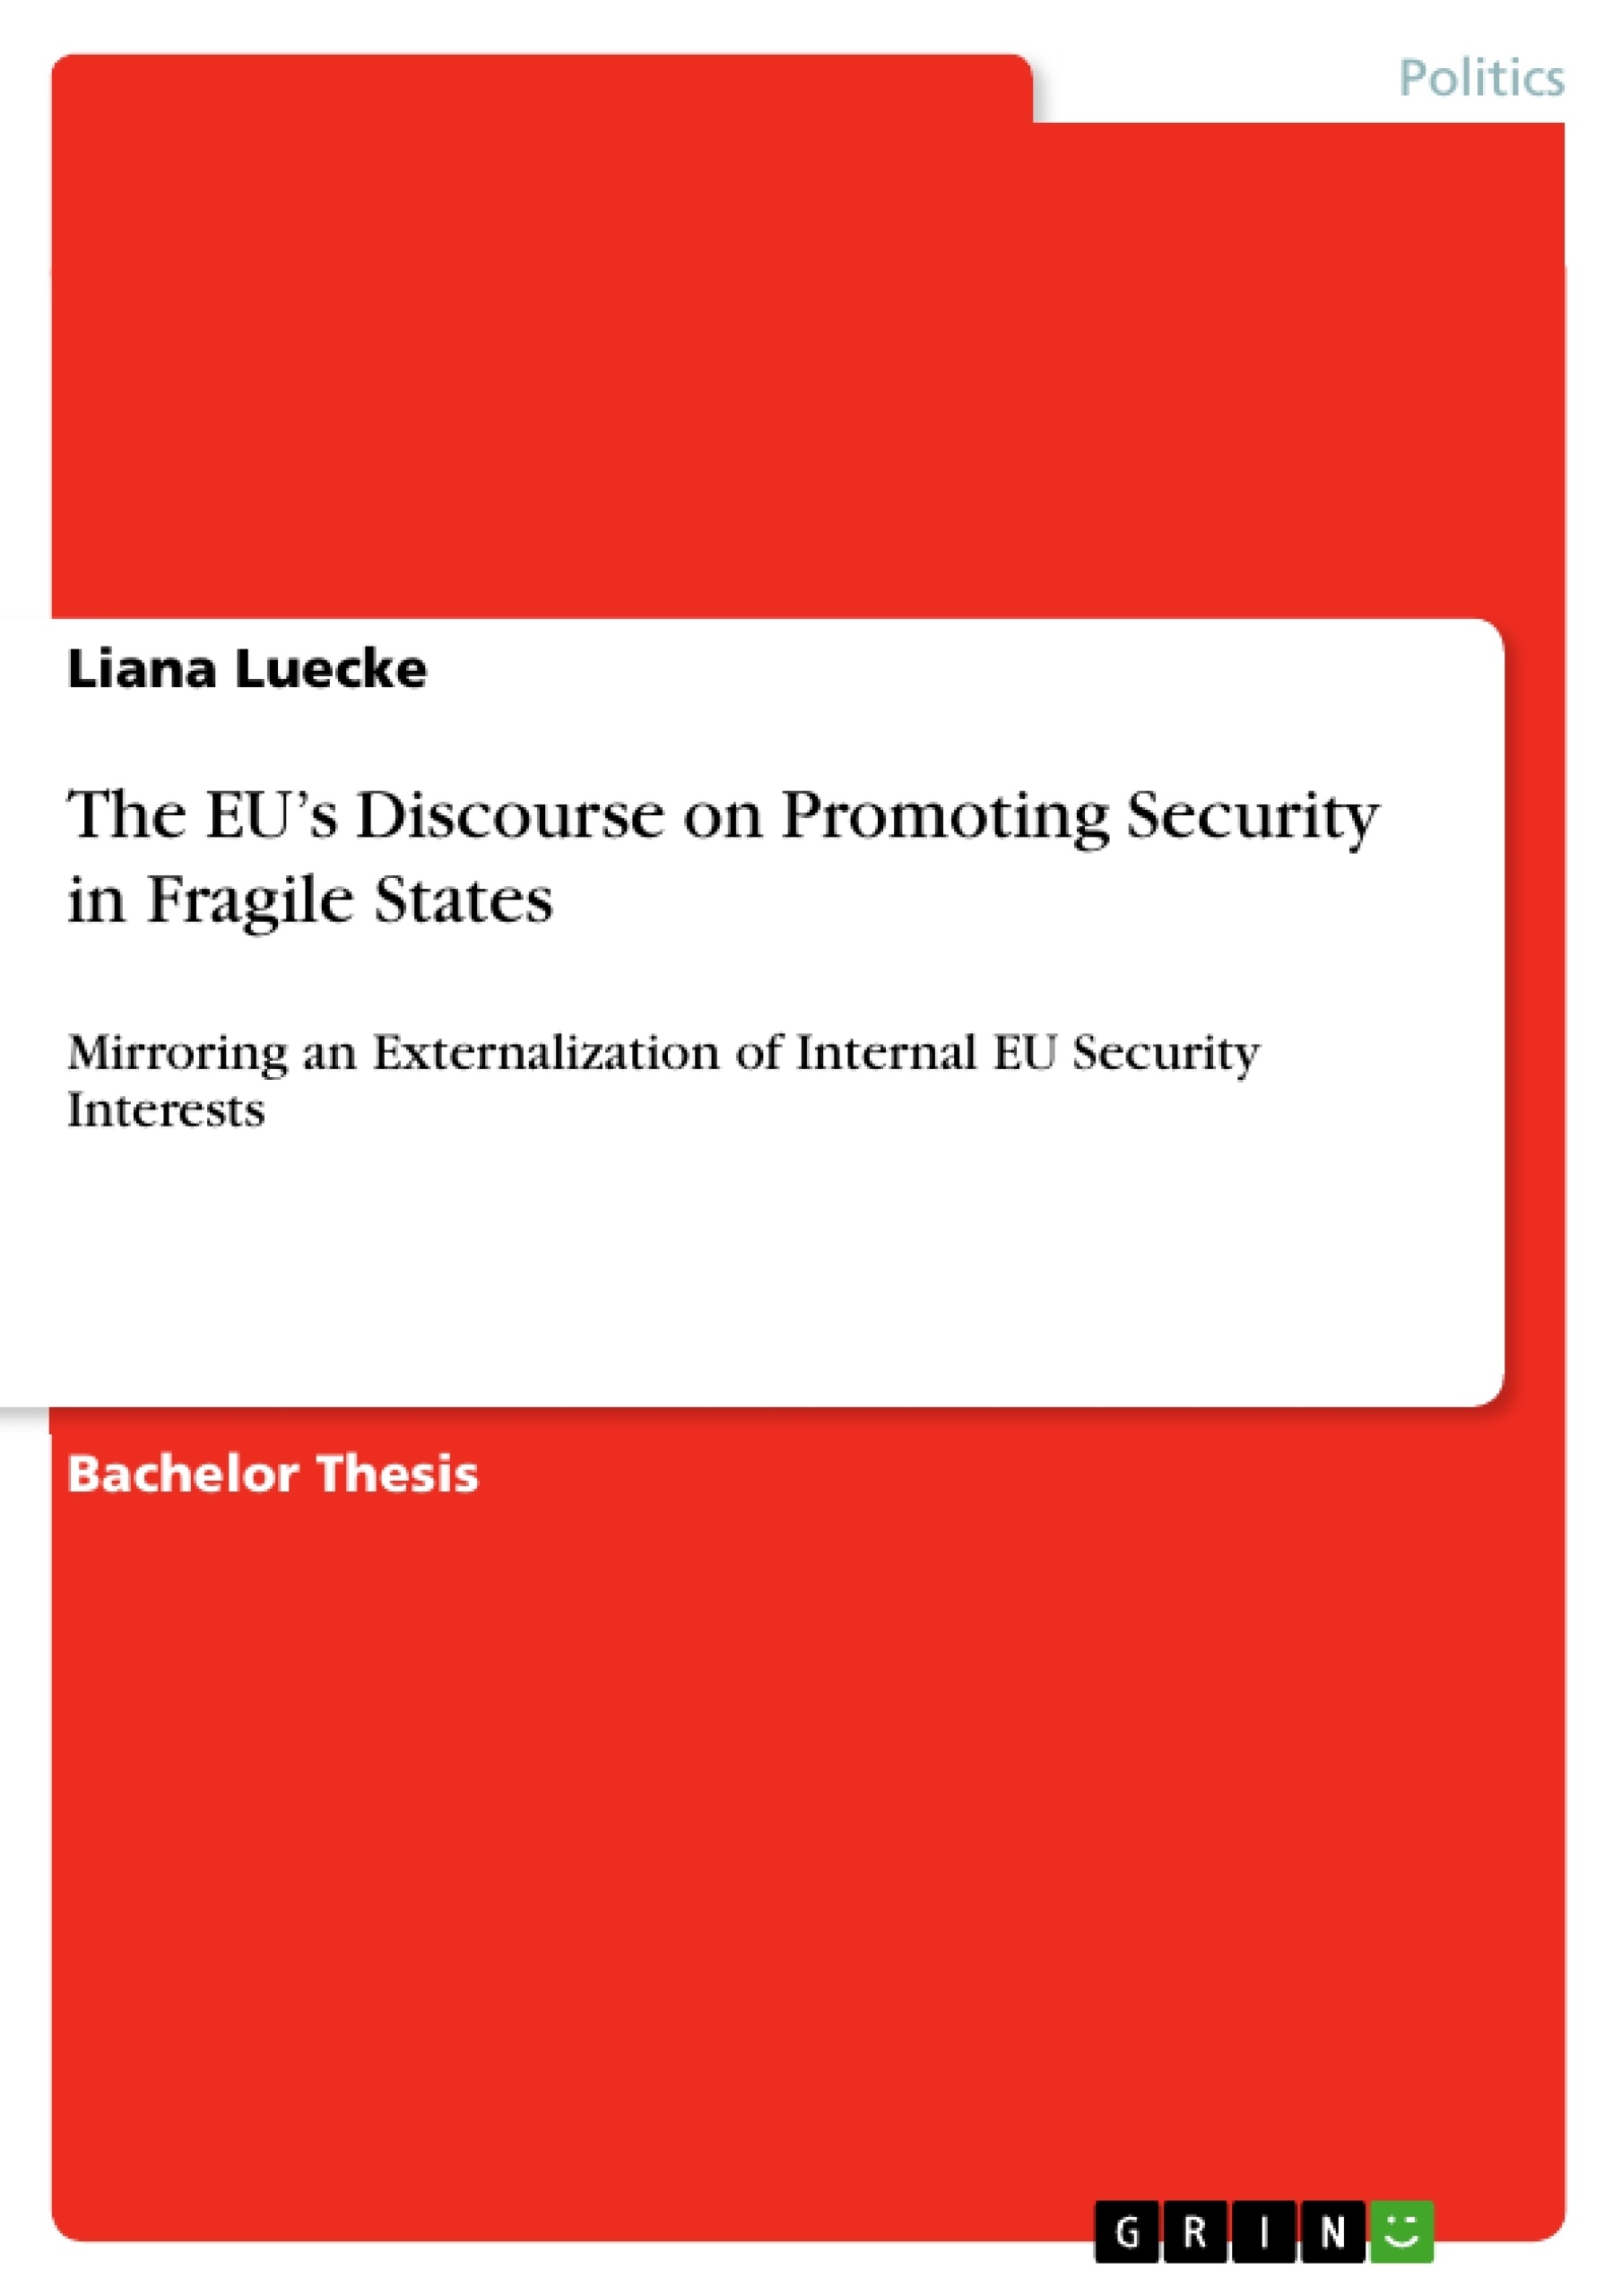 Title: The EU’s Discourse on Promoting Security in Fragile States